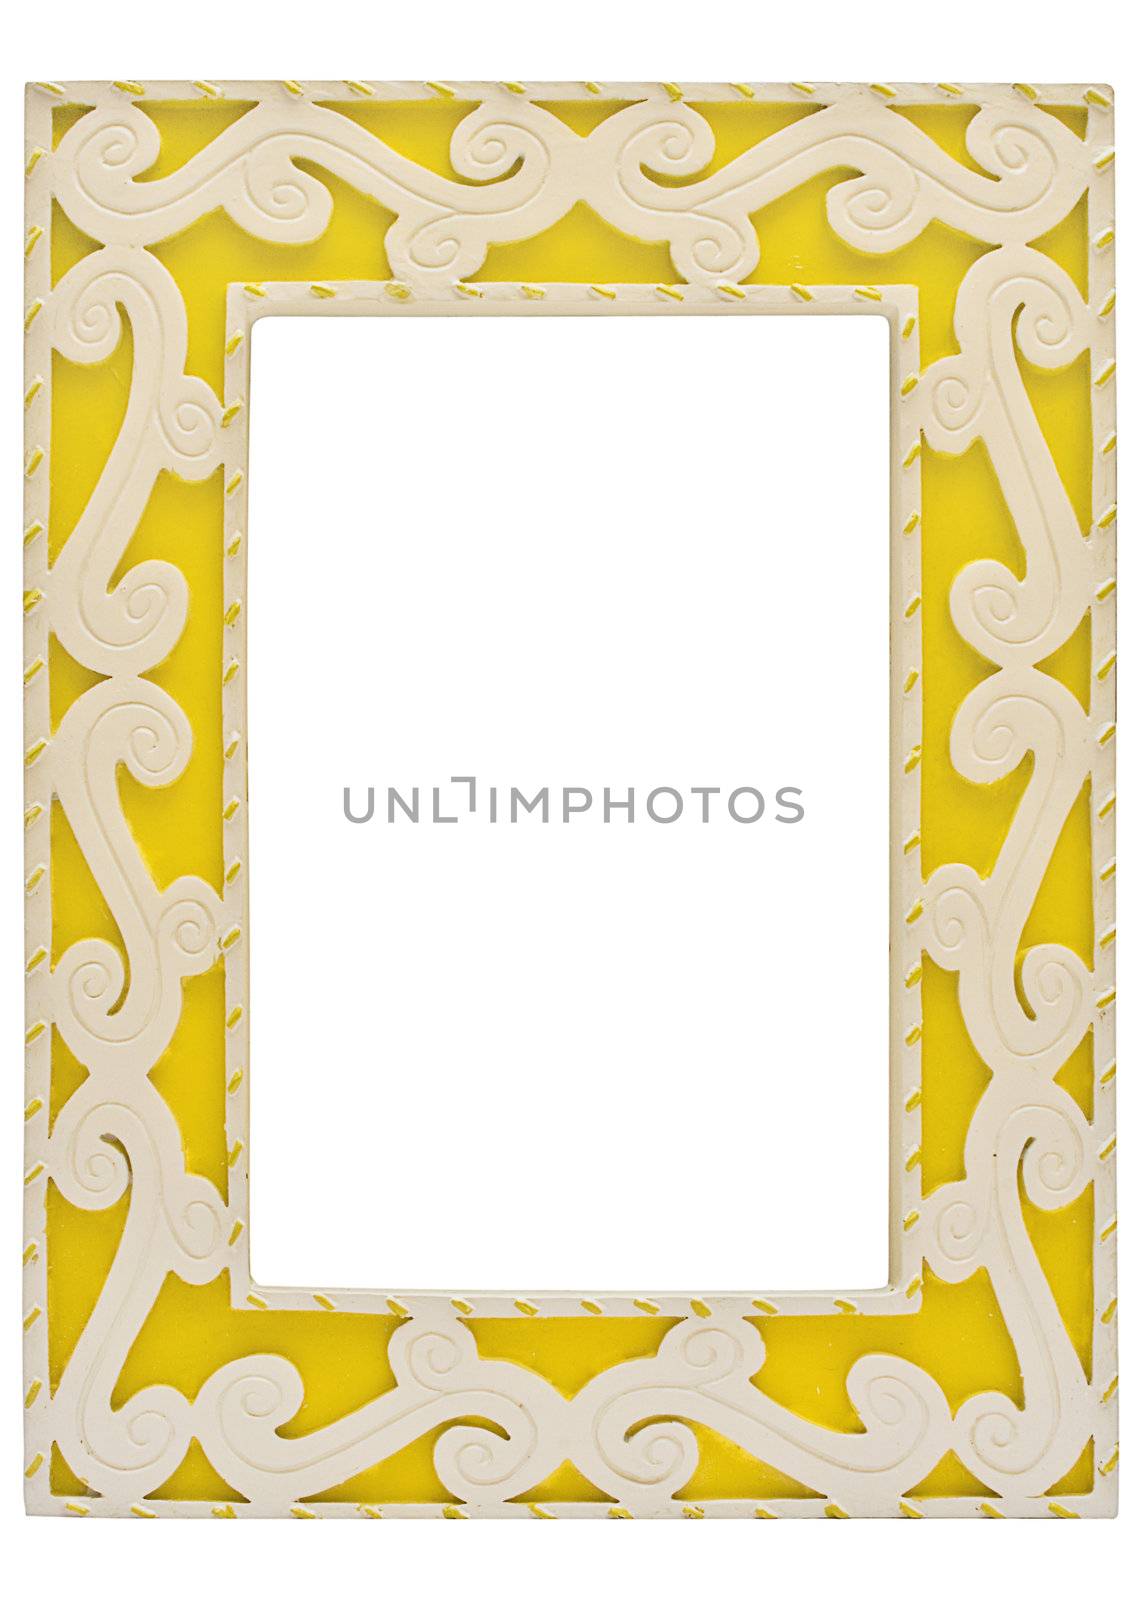 Ornamented picture frame isolated on a white background. File contains clipping path.